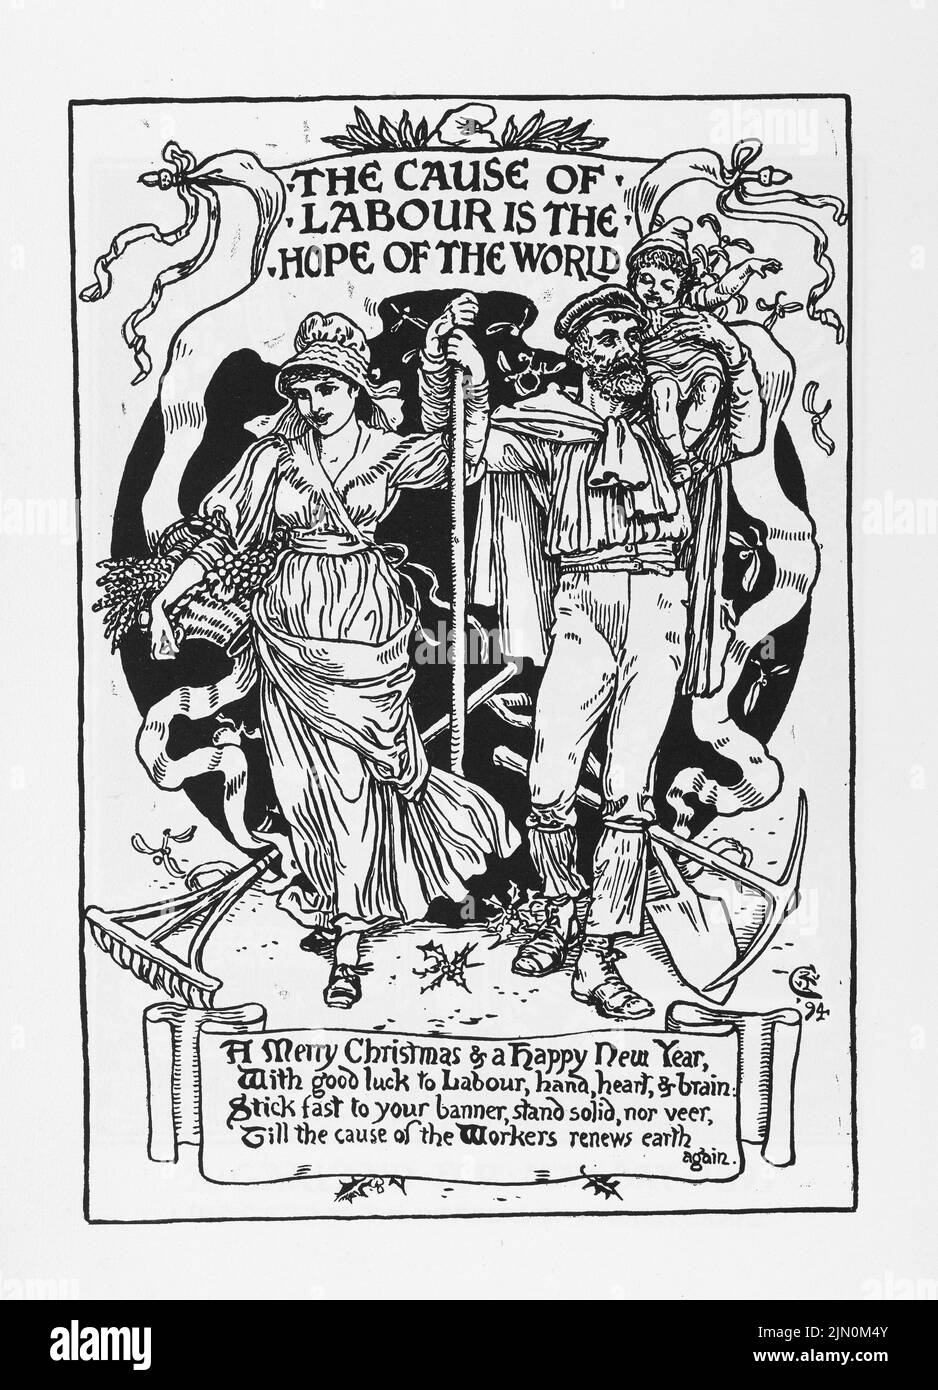 The Cause of Labour is the Hope of the World. Illustration by Walter Crane from Cartoons for the Cause 1886-1896, International Socialist Workers. Stock Photo